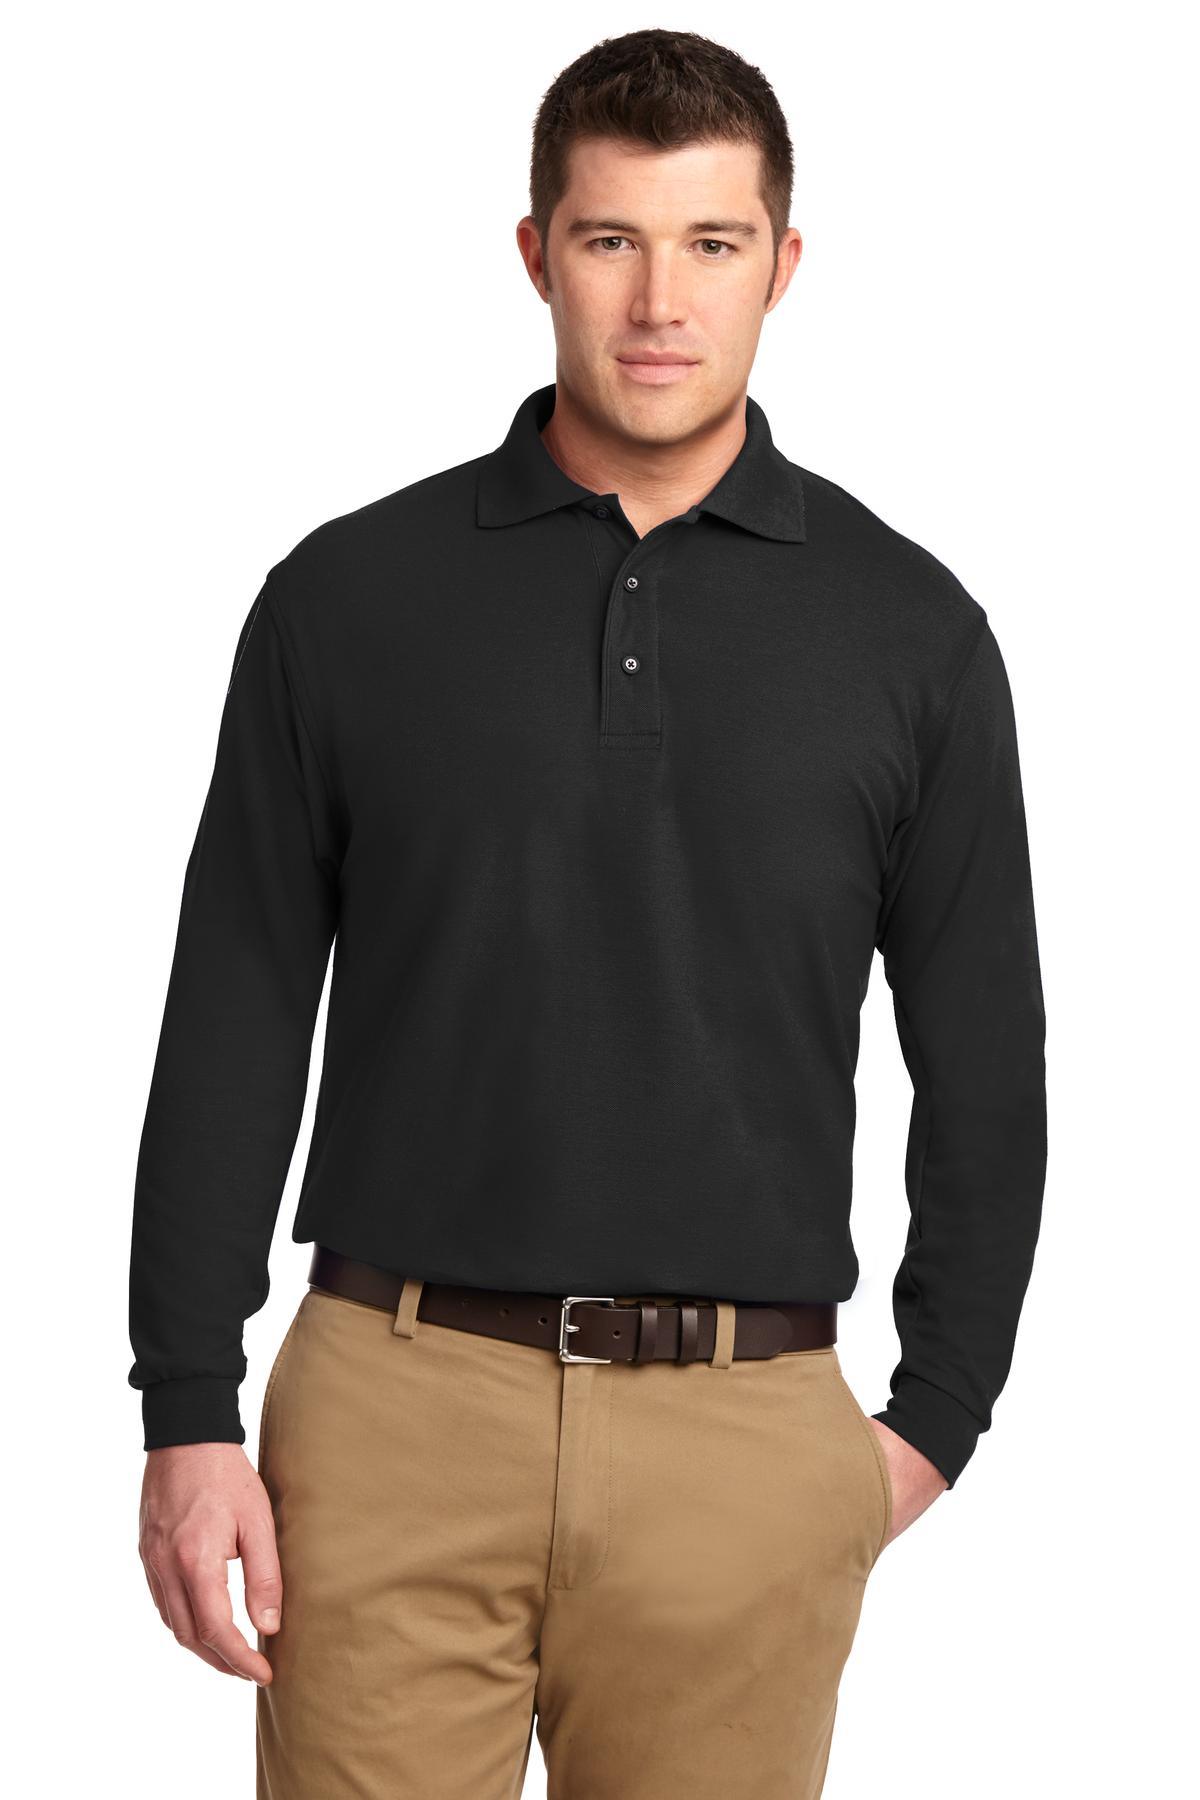 Port Authority Silk Touch Long Sleeve Polo. K500LS - Dresses Max